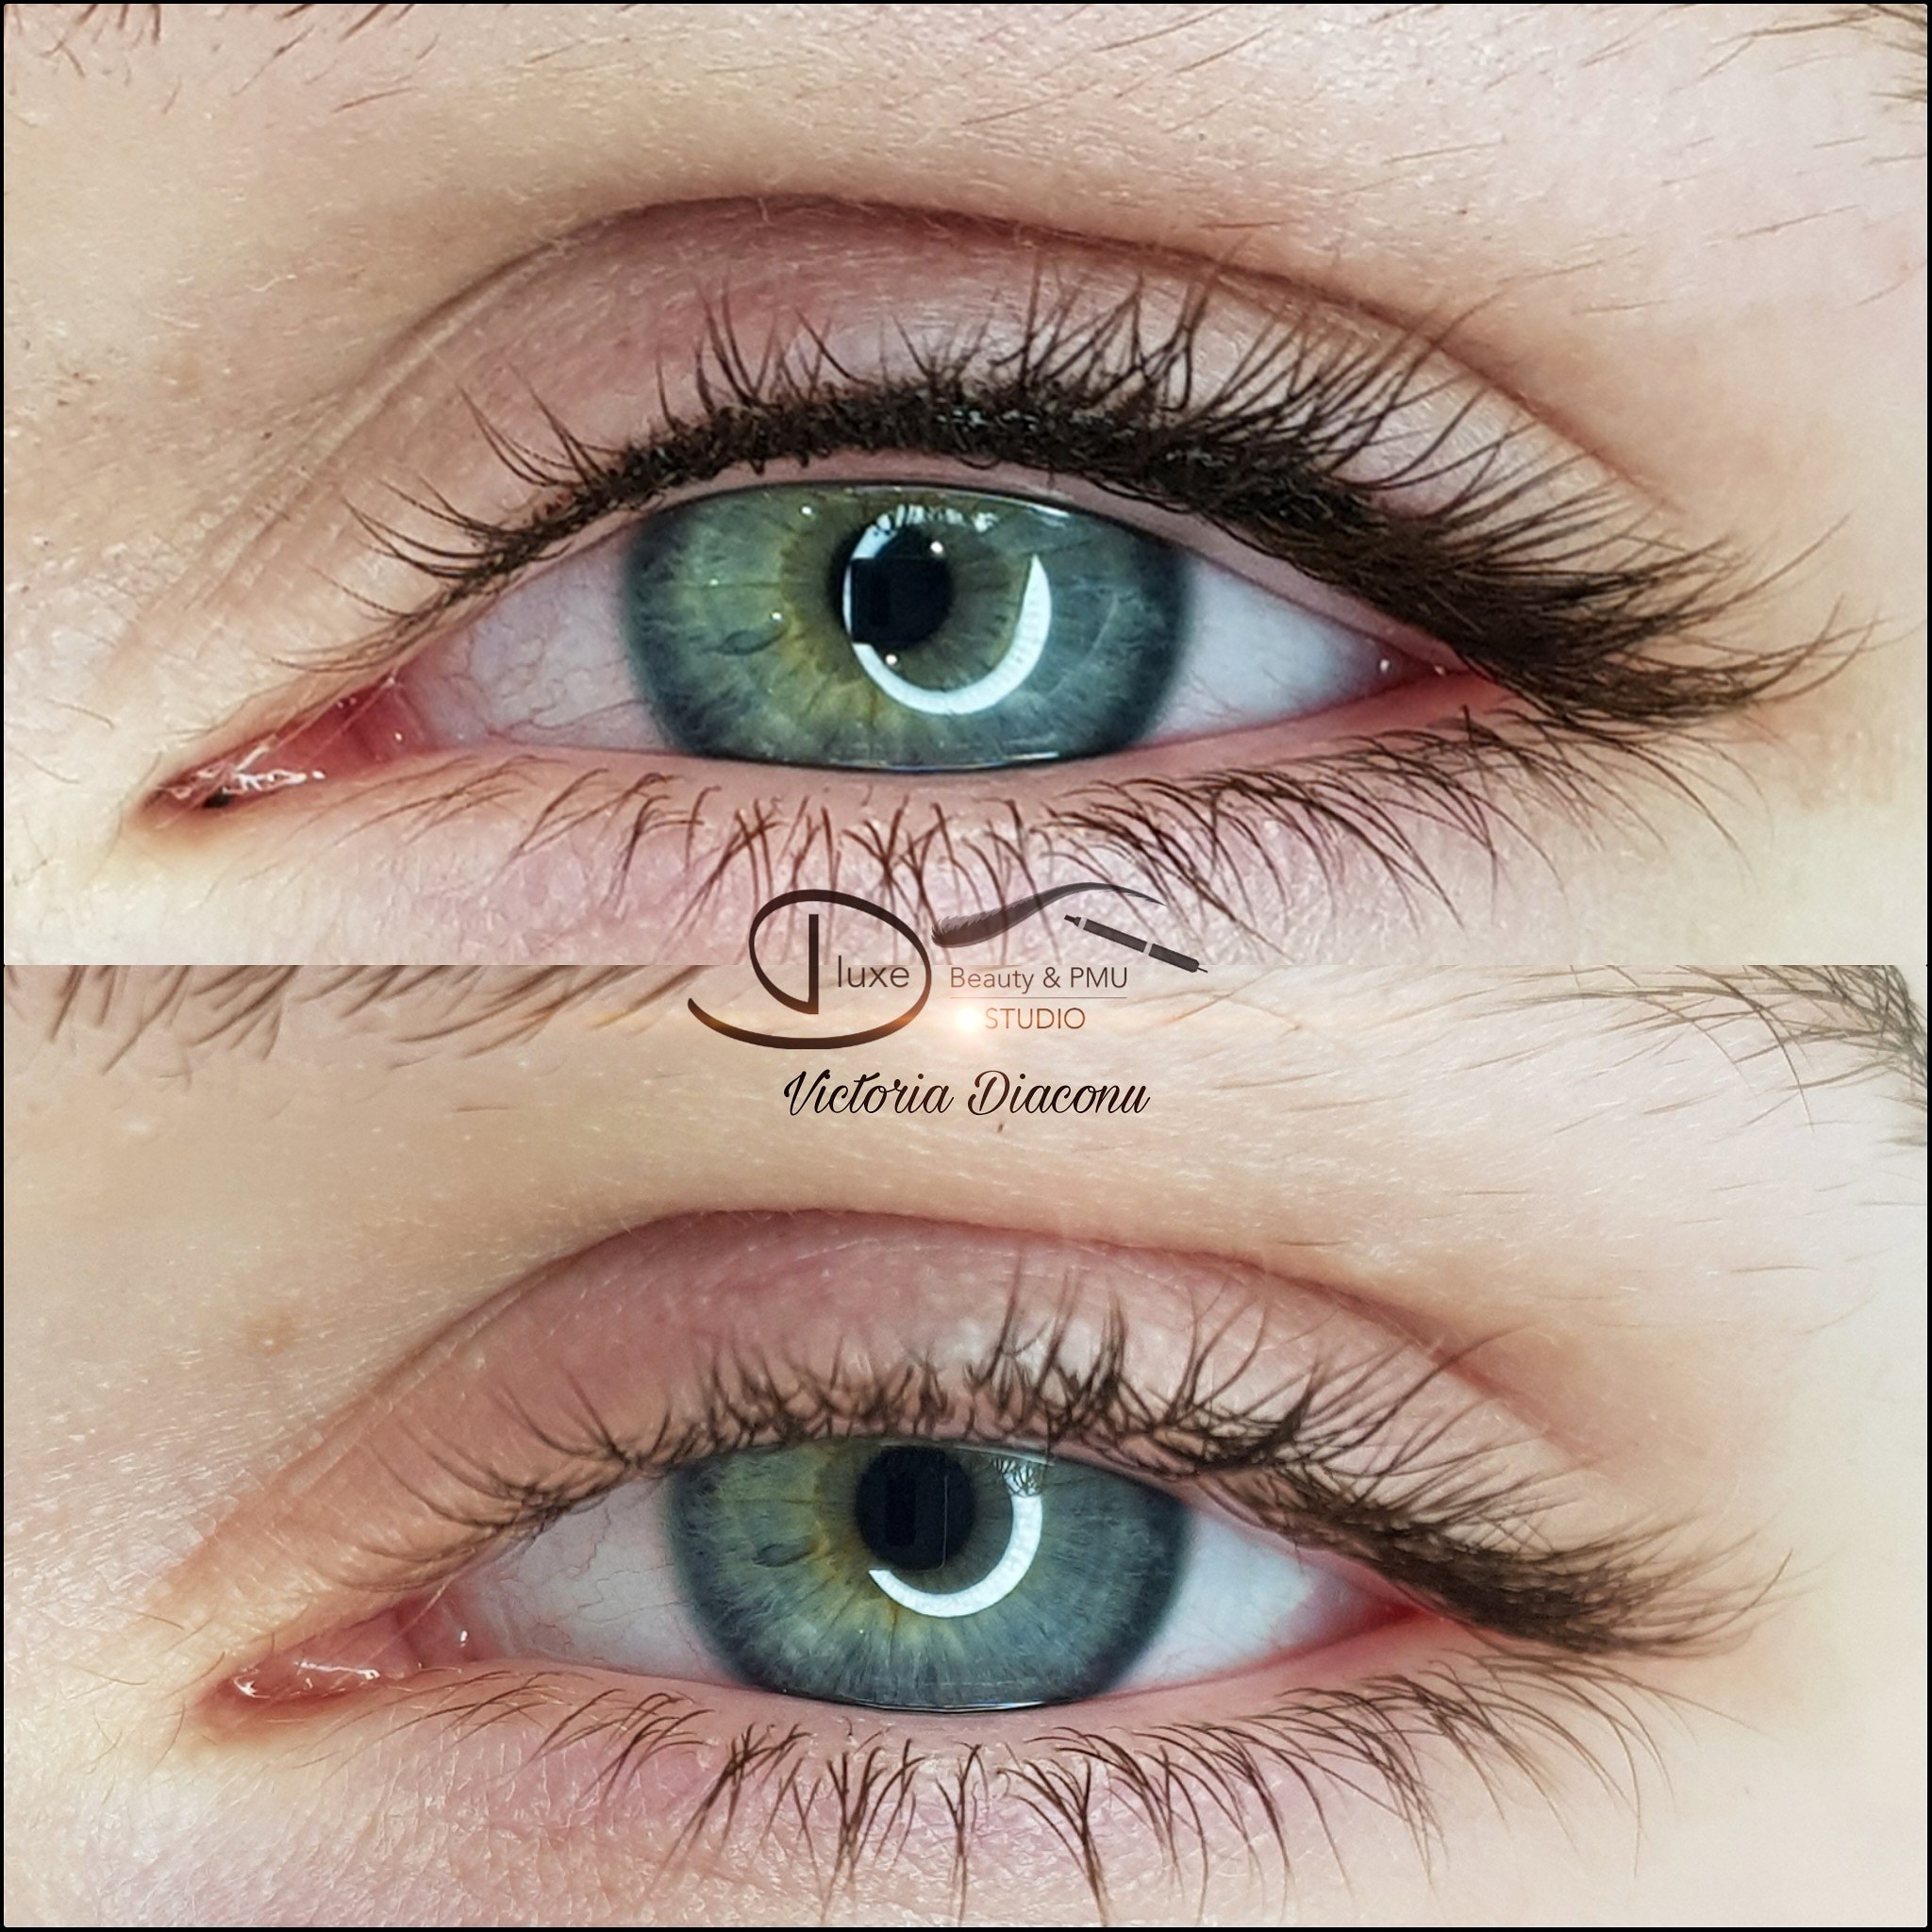 Pure Love Eyelid tattoos done by Duncan and midtown tattoo in LA   rbodymods